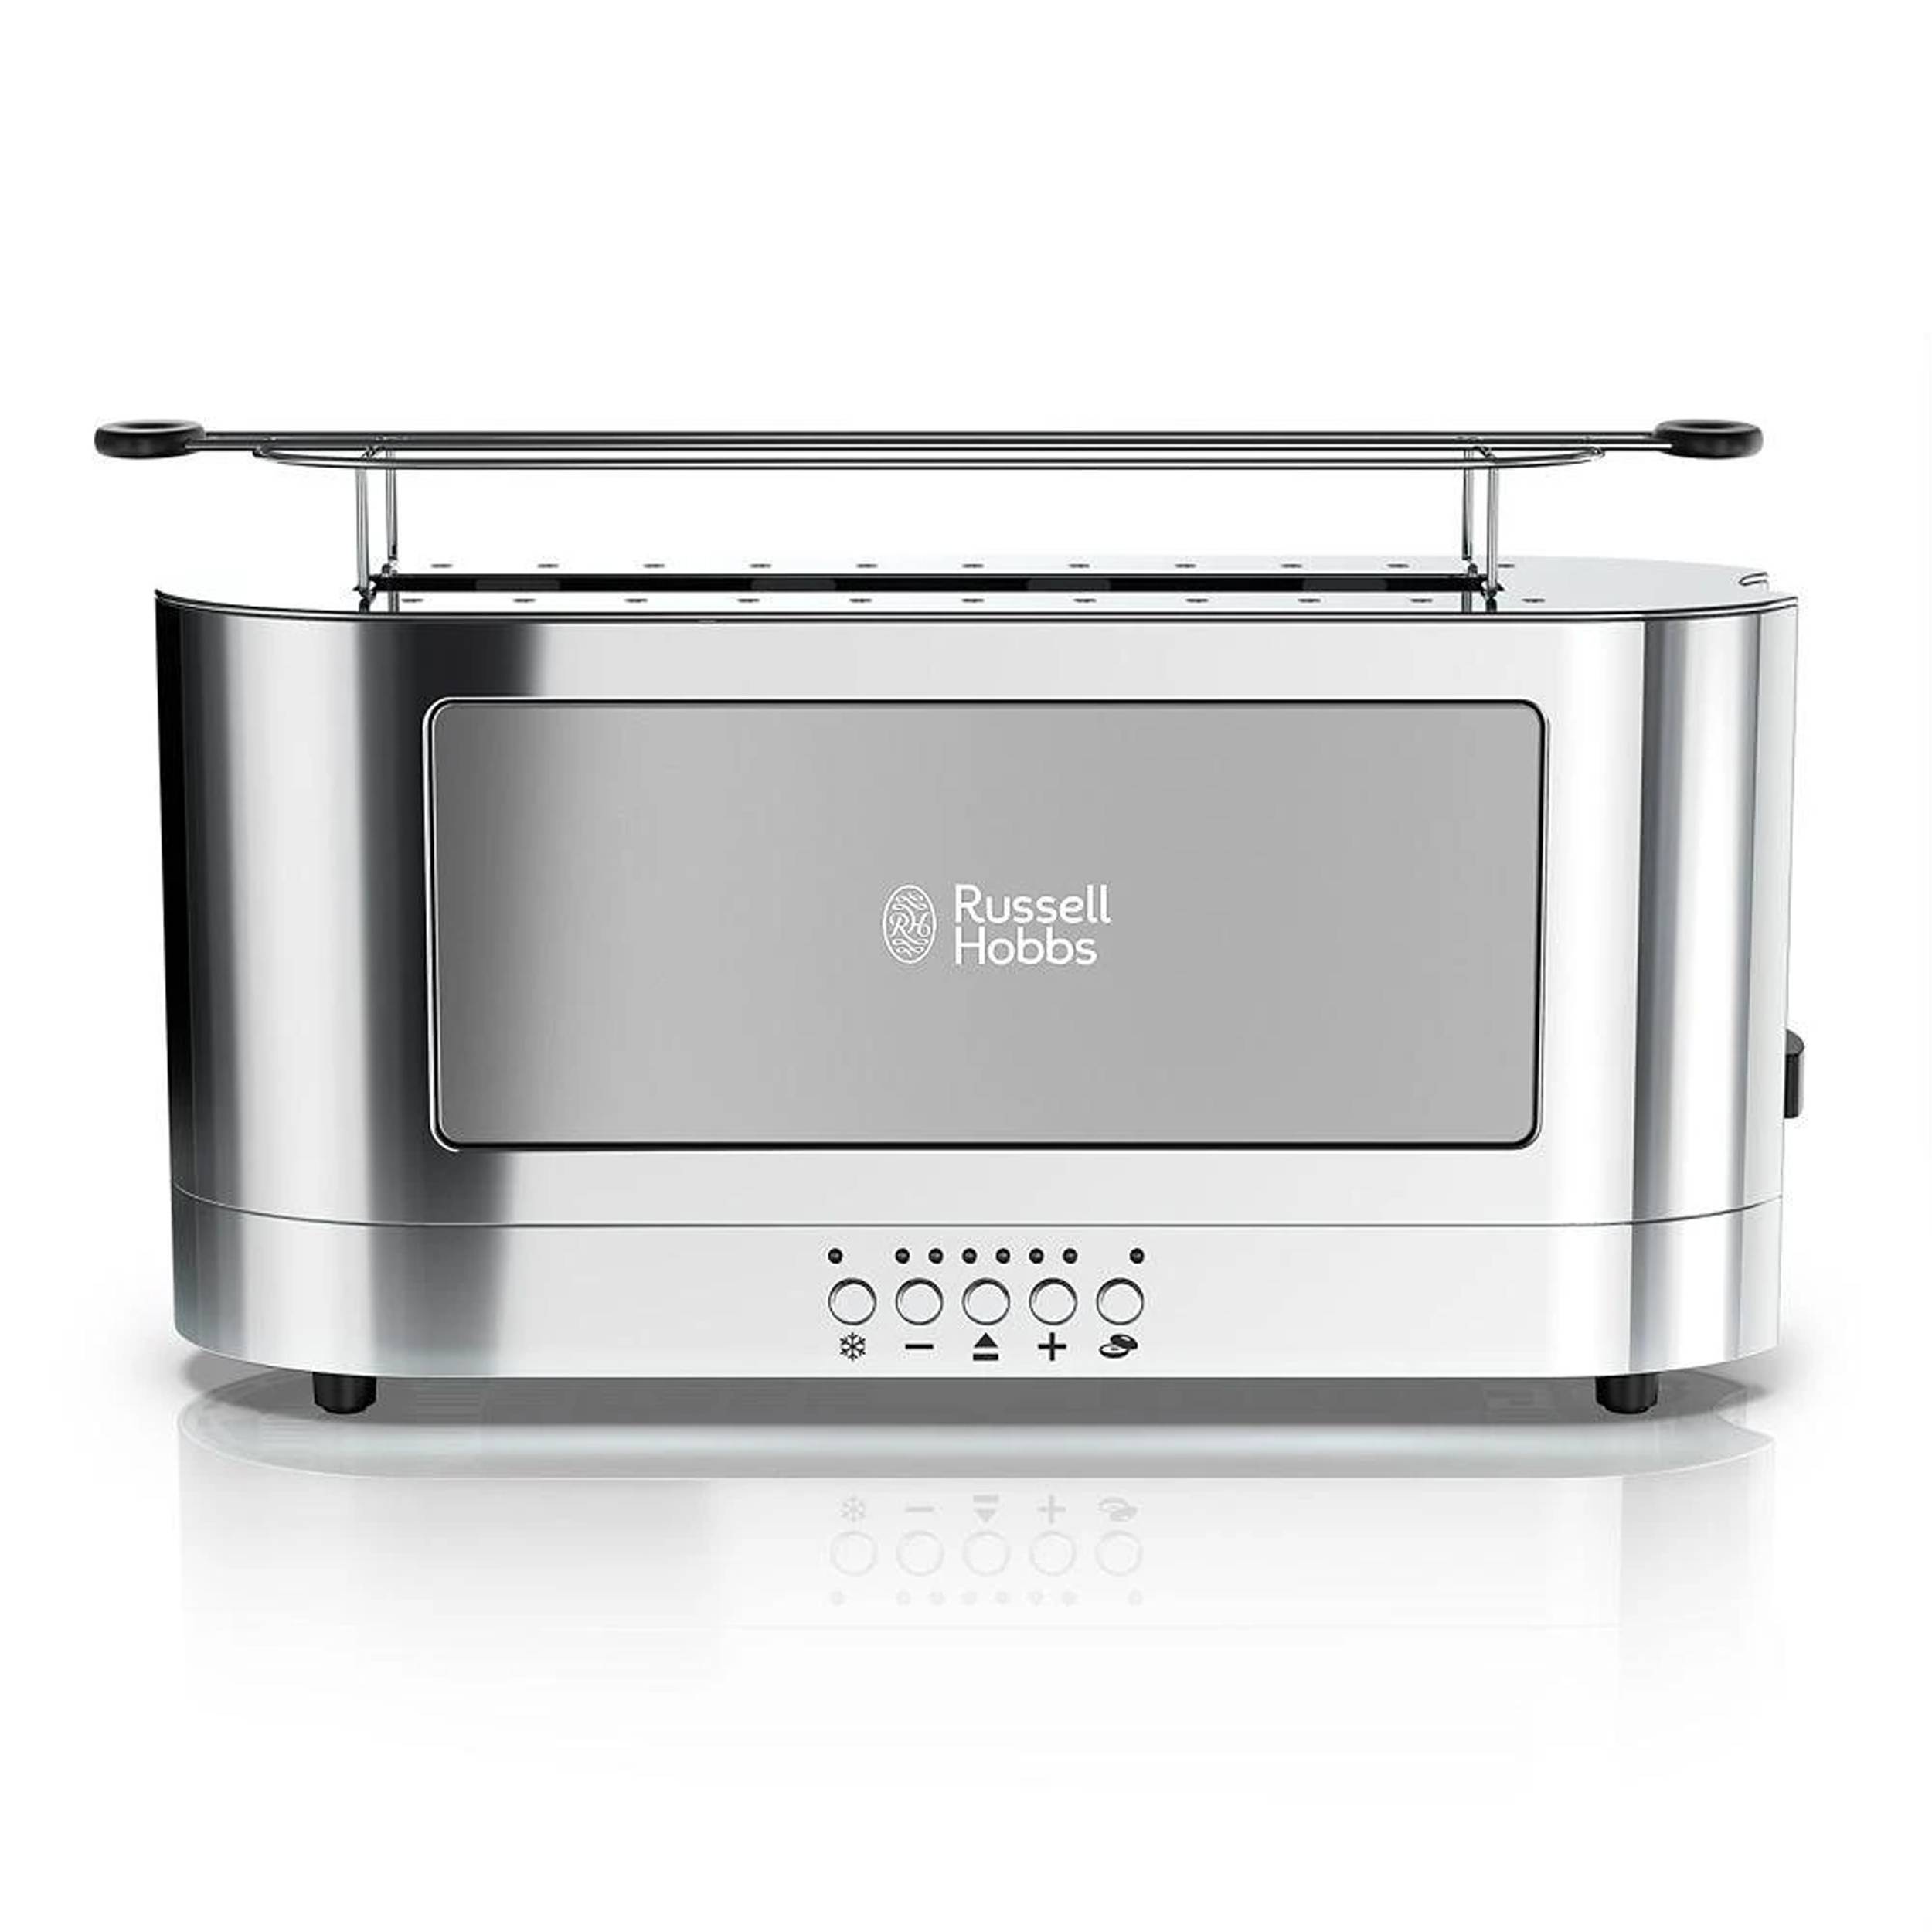 Russell Hobbs 2-Slice Stainless Steel 1200-Watt Toaster in the department at Lowes.com